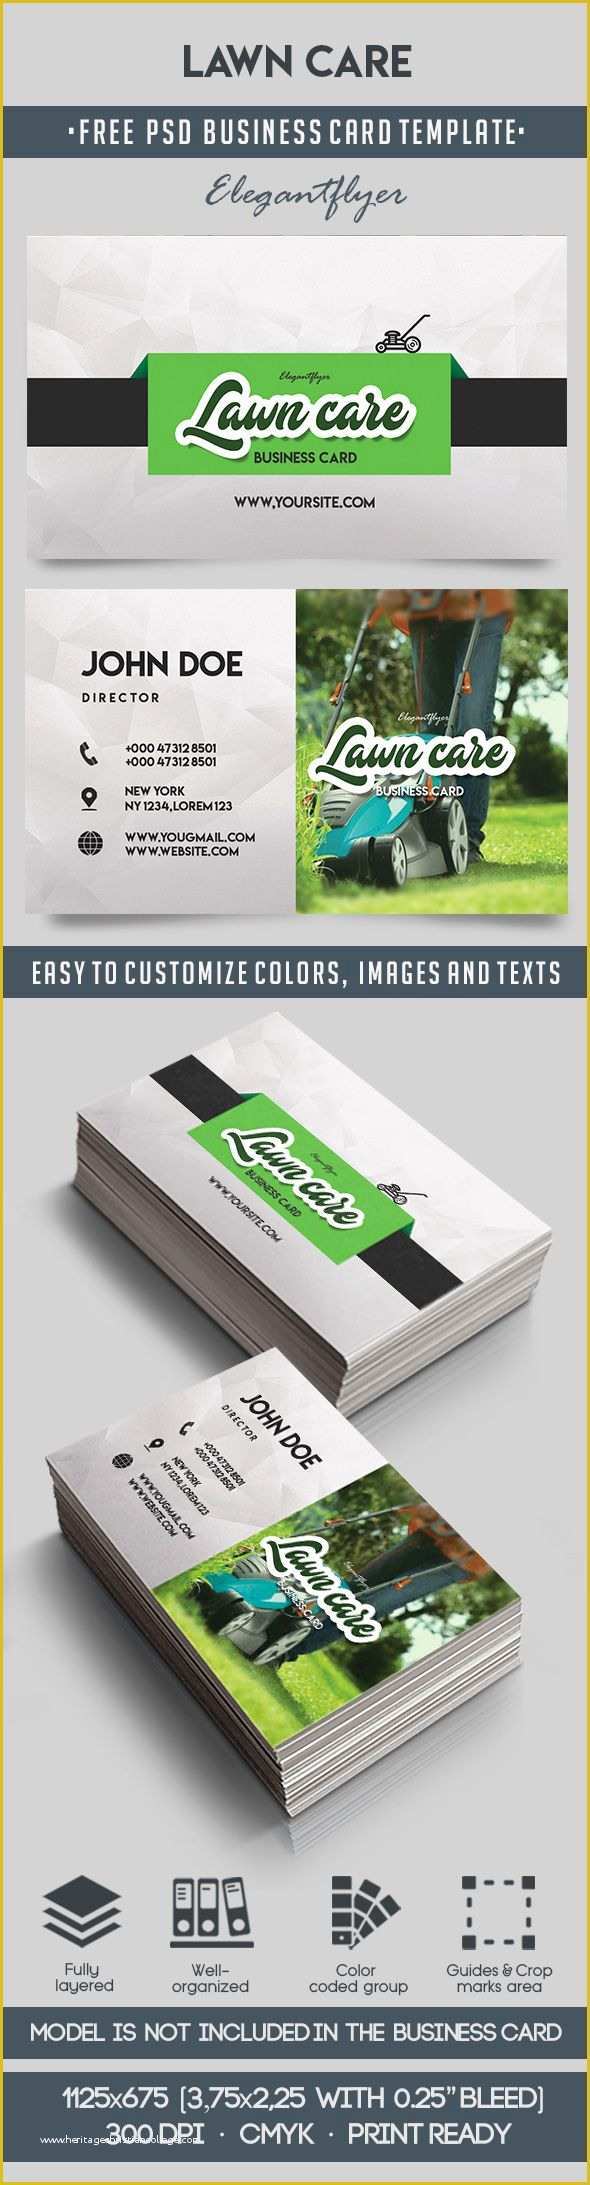 Free Nursing Business Card Templates Of Lawn Care – Free Business Card Templates Psd – by Elegantflyer